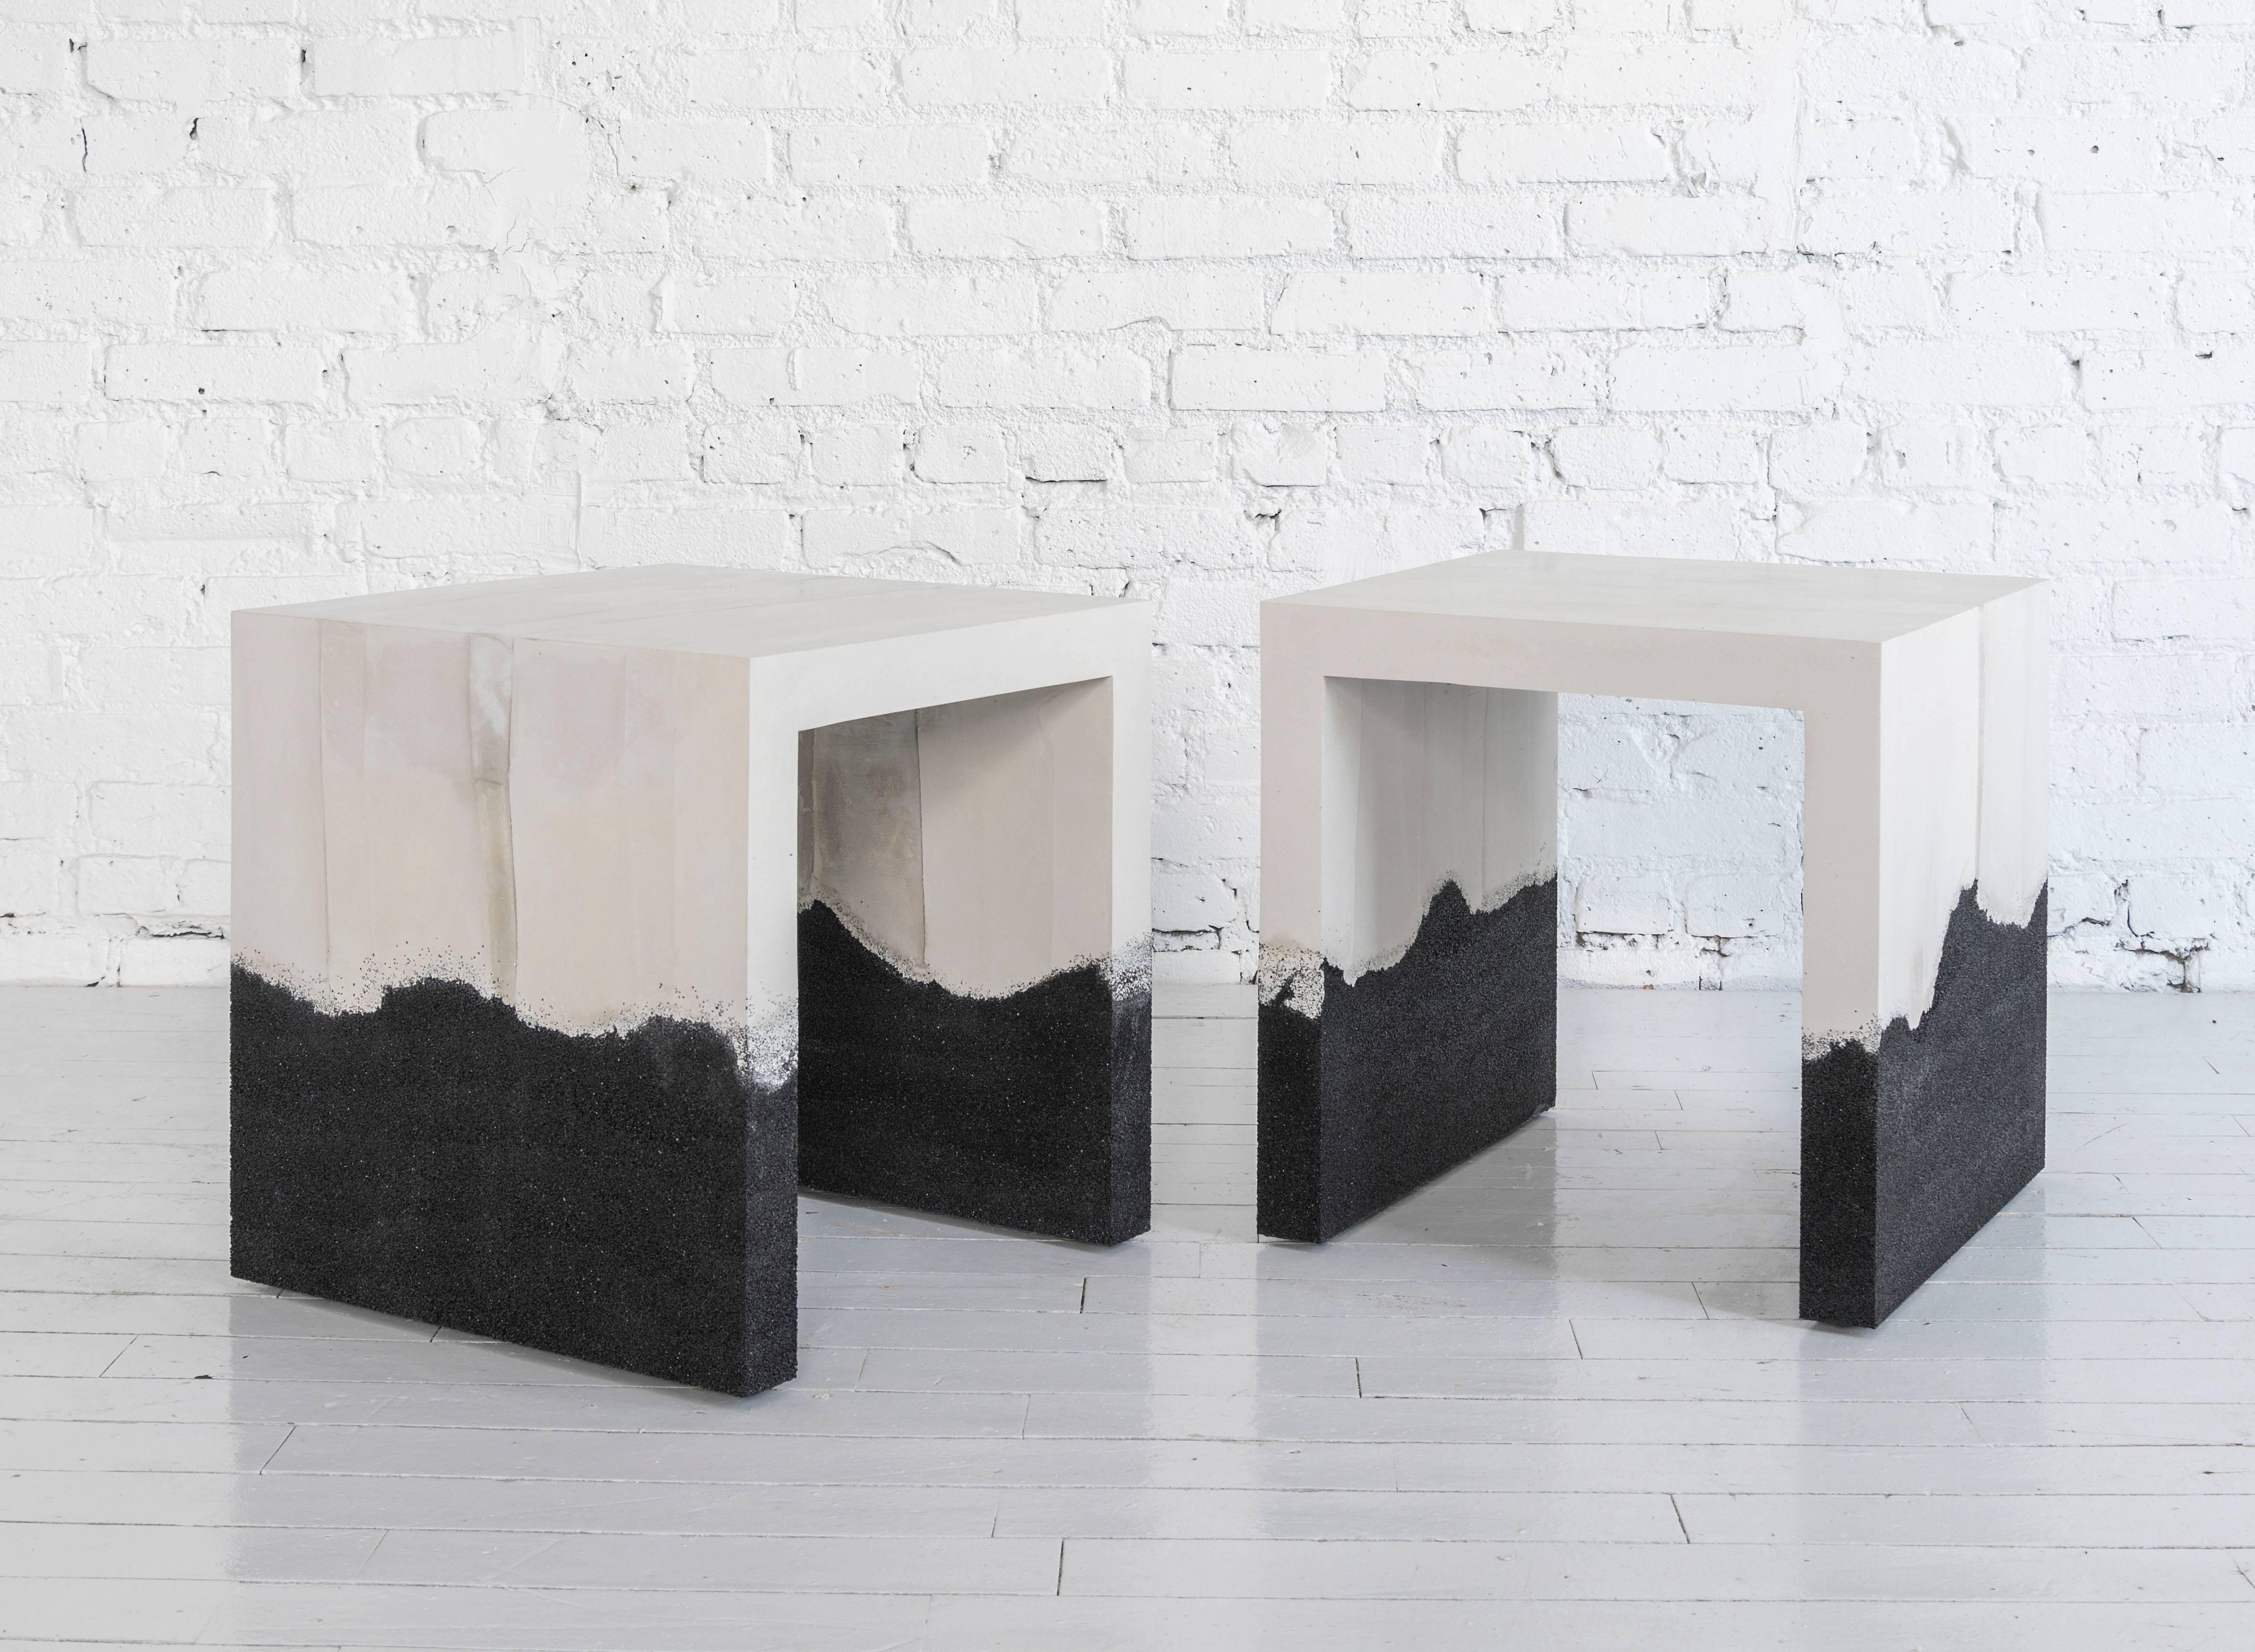 A layering of cement and silica, the made-to-order side table consists of gradients of tones and textures suggesting layers of earth and mountain ranges. The hand-dyed granules are stratified with delicate veins and ombre effects to create an